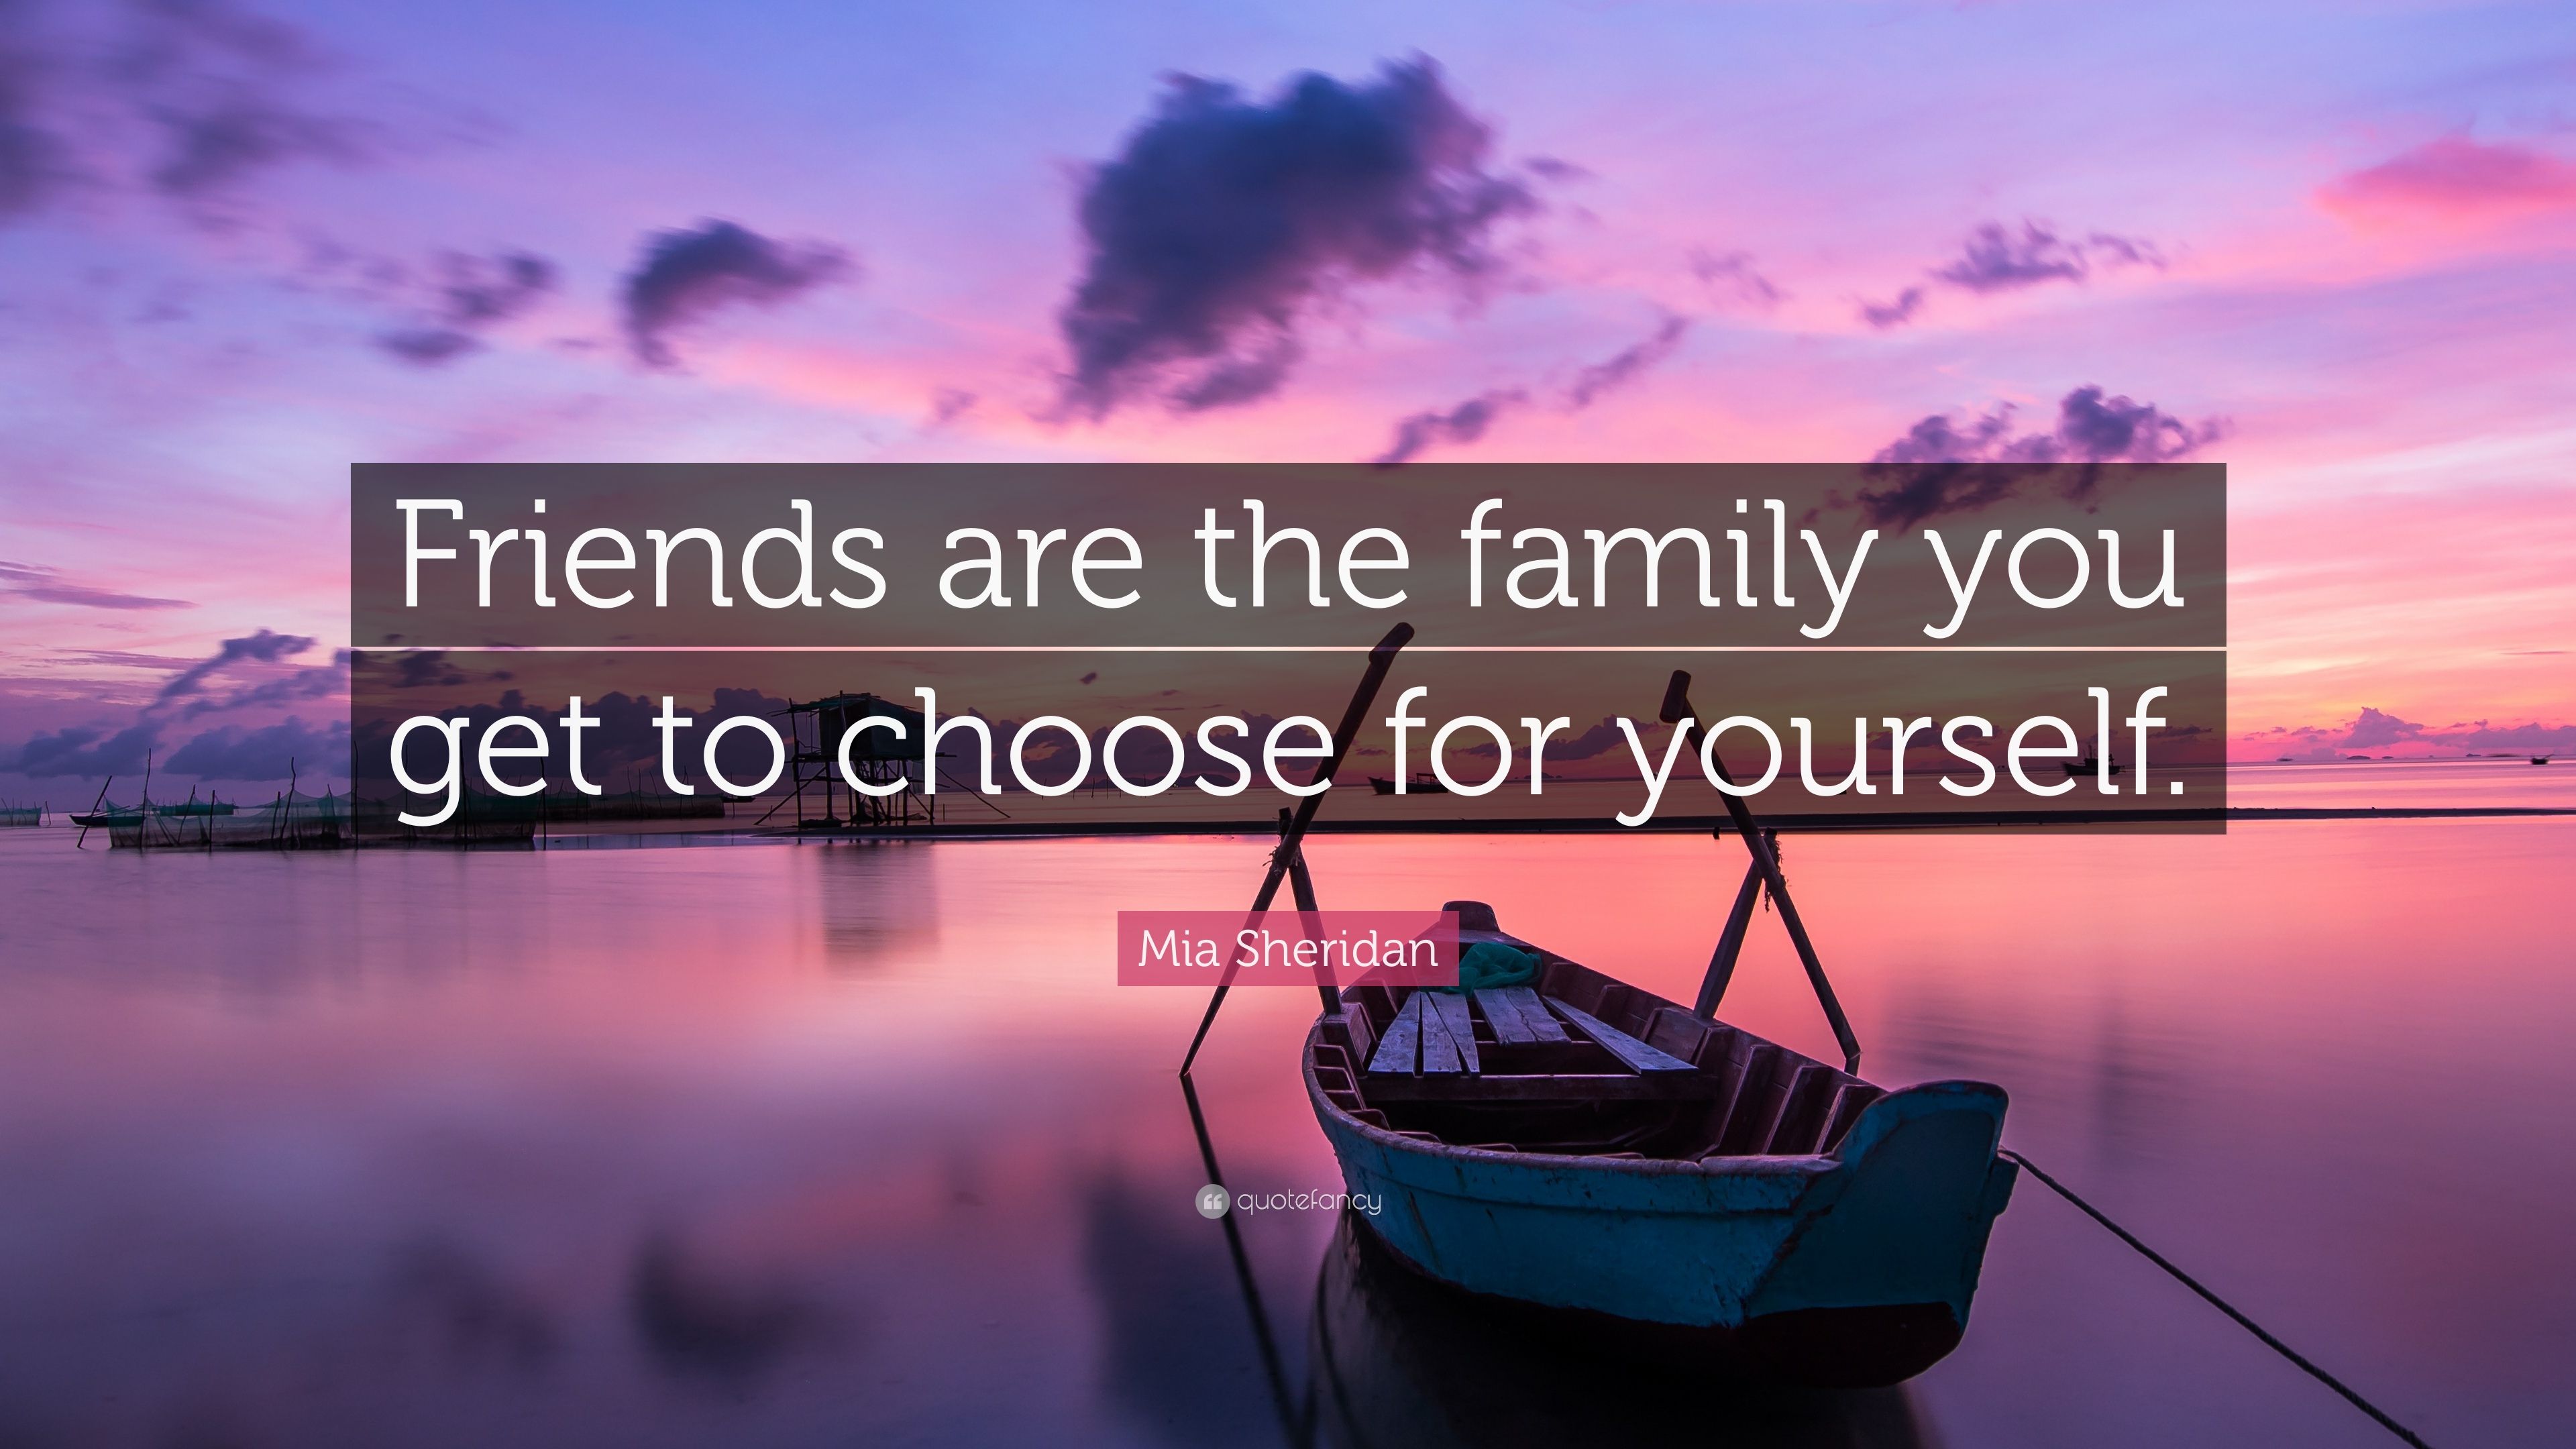 Mia Sheridan Quote: “Friends are the family you get to choose